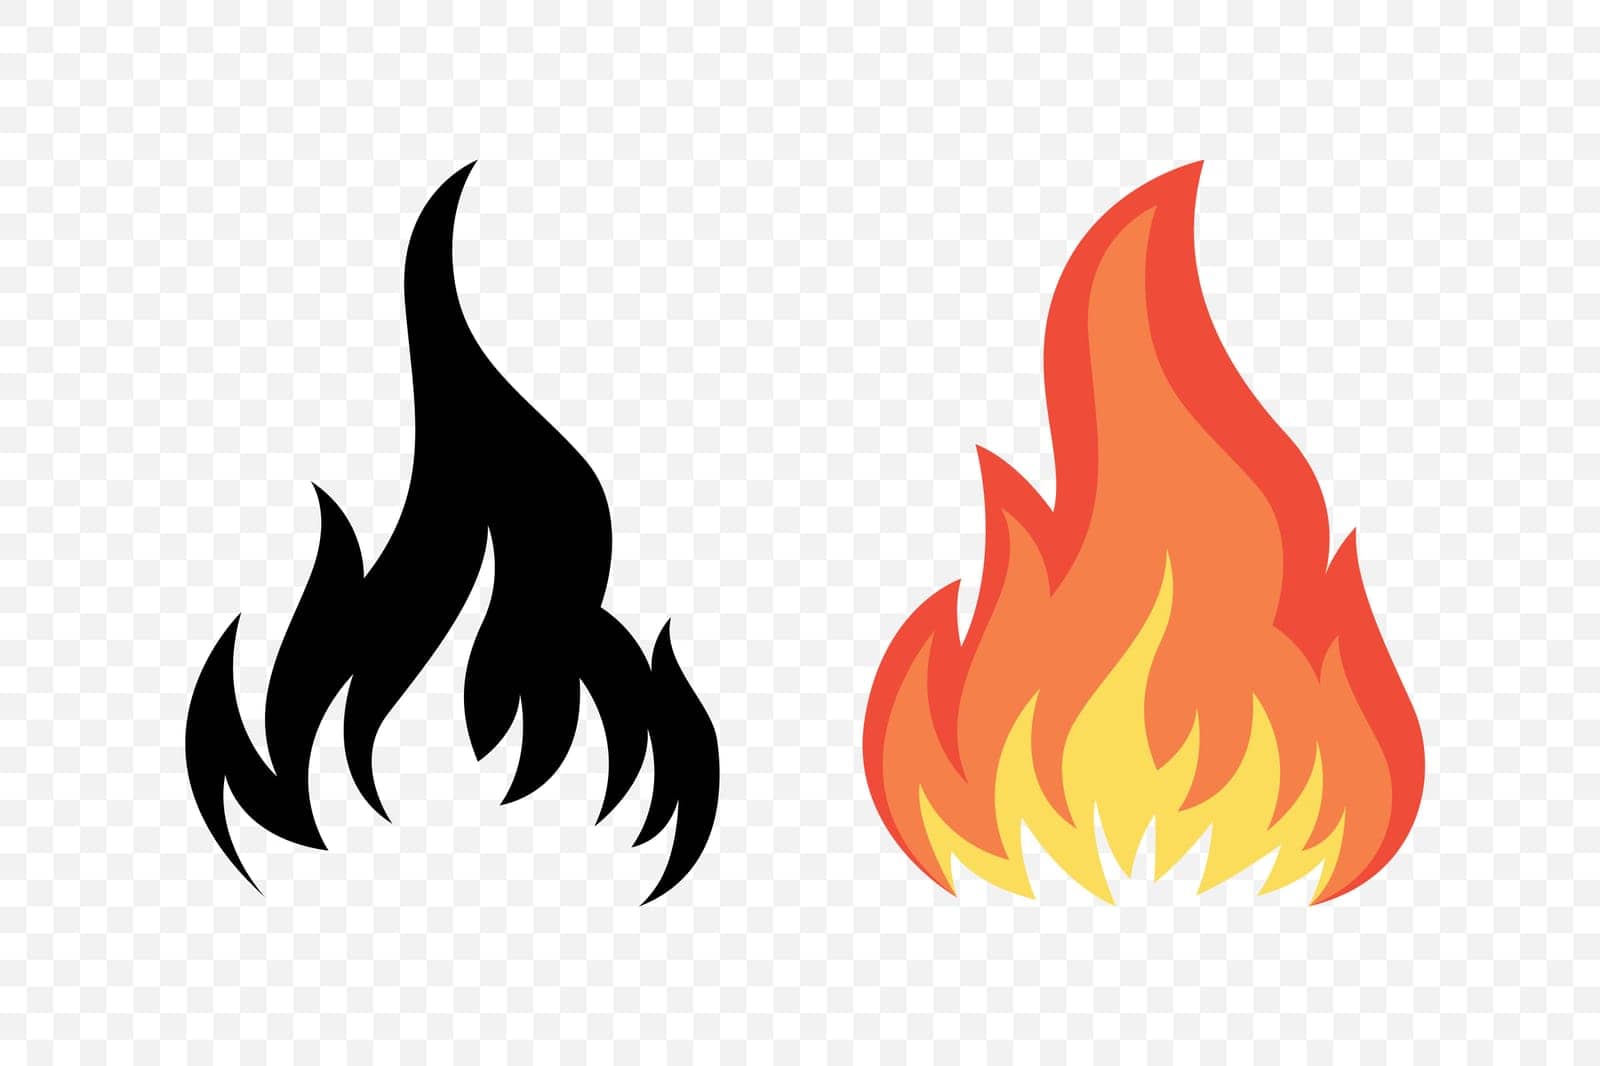 Flat Vector Fire Flame Icon Set. Campfire Shape Sign, Isolated. Bonfire Vector Illustration for Outdoor, Adventure, and Nature Concept by Gomolach